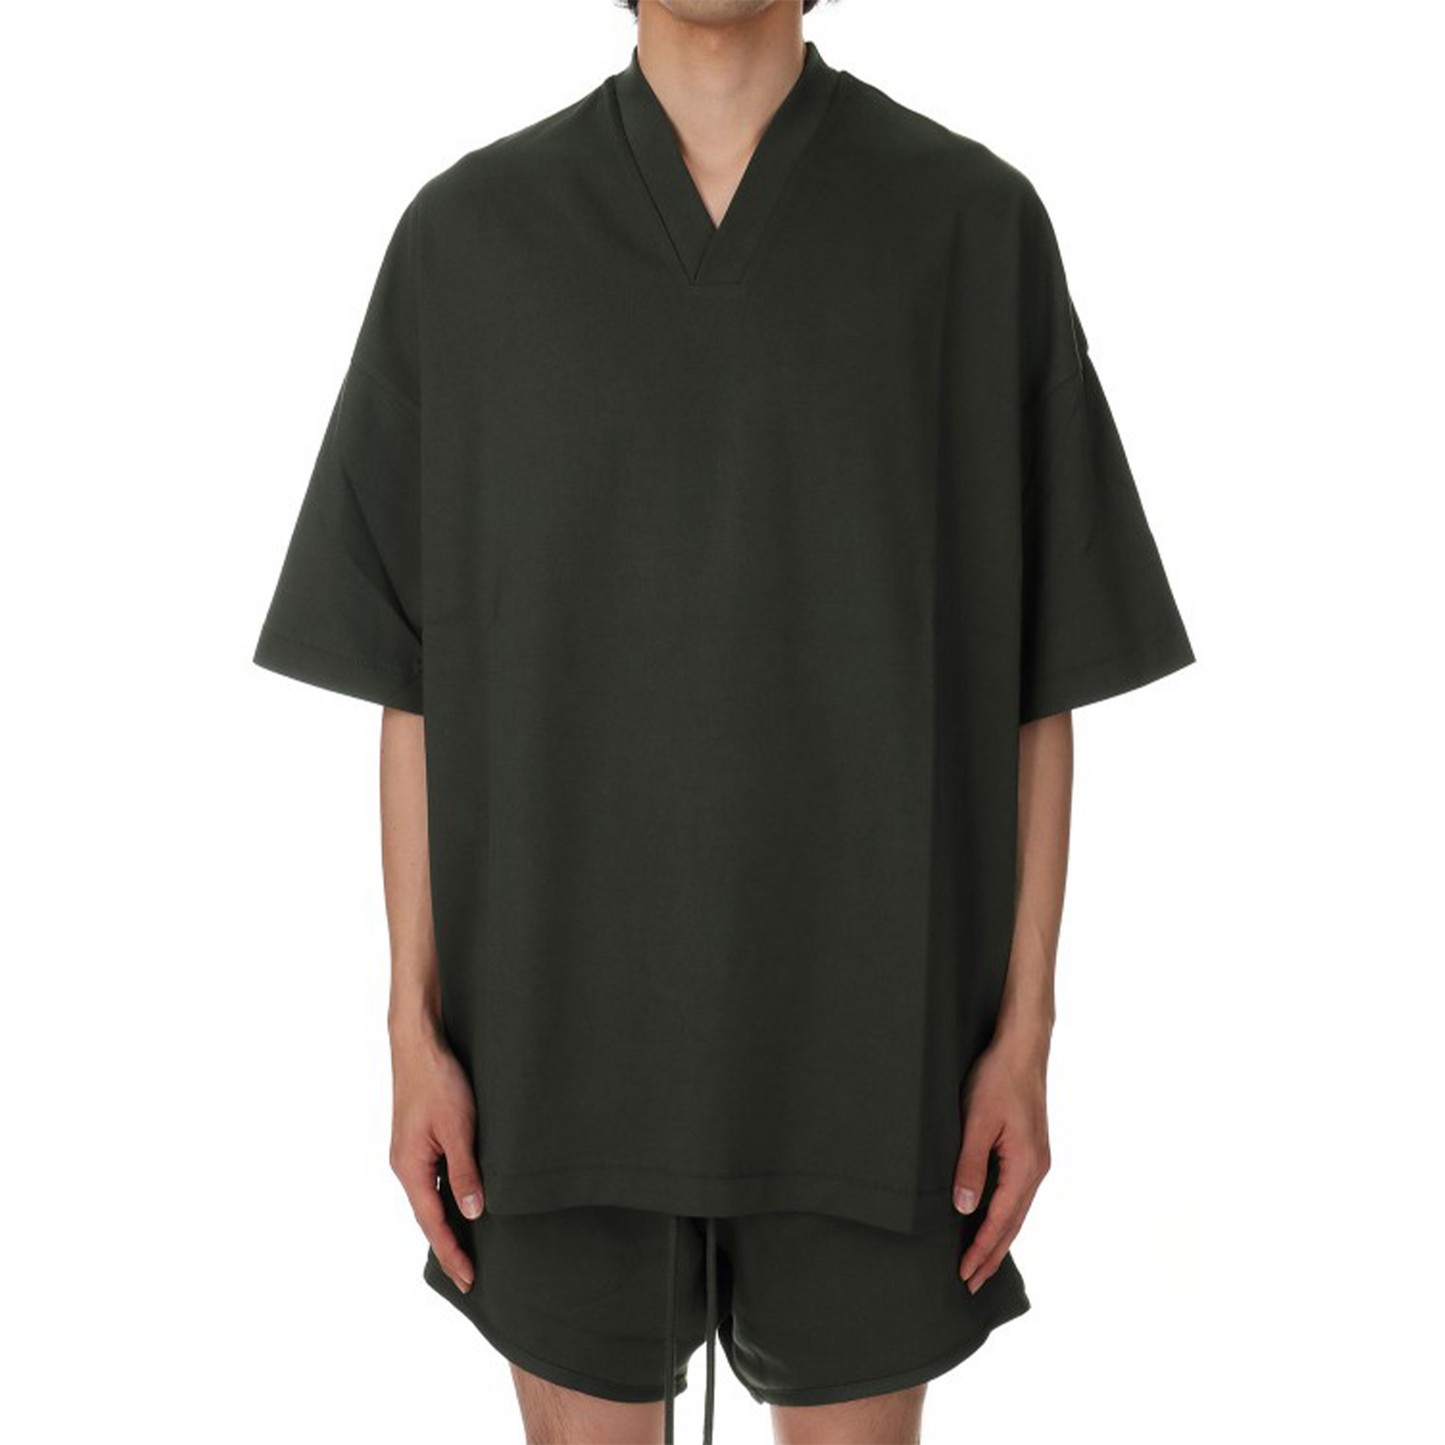 Fear of God Essentials V-Neck Tee Ink (SS24)